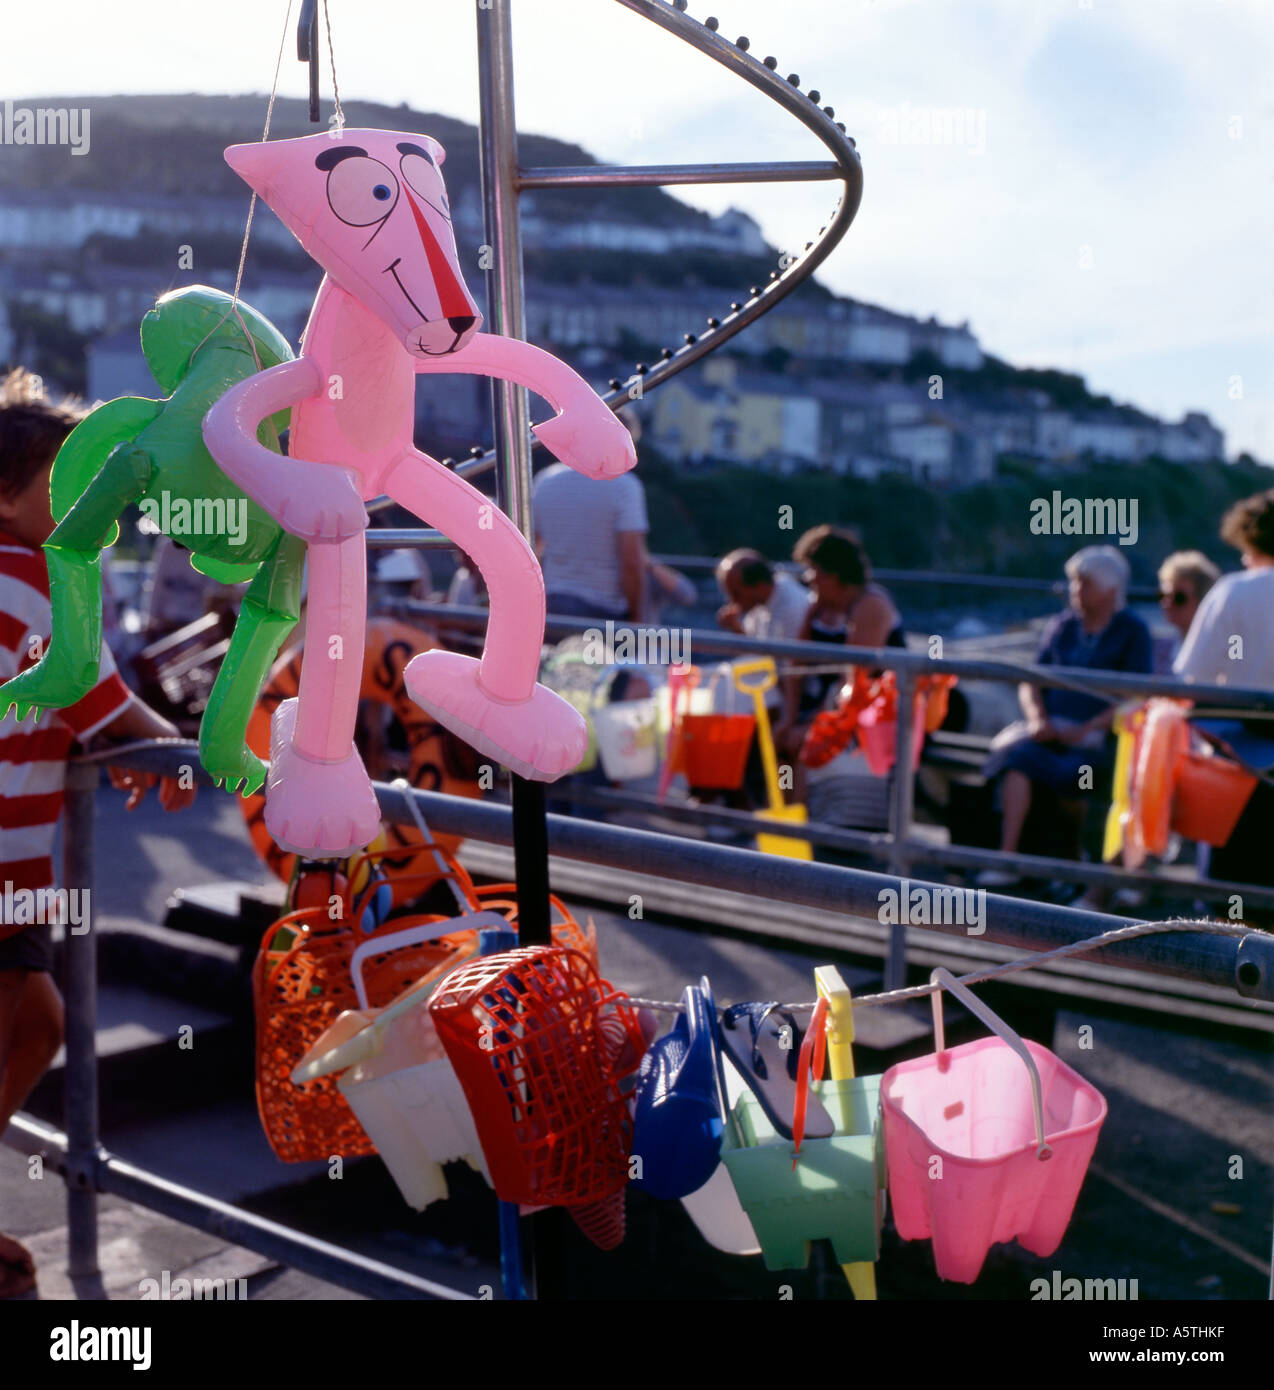 Inflatable pink panther on sale at a beach toy shop, New Quay, Wales, UK  KATHY DEWITT Stock Photo